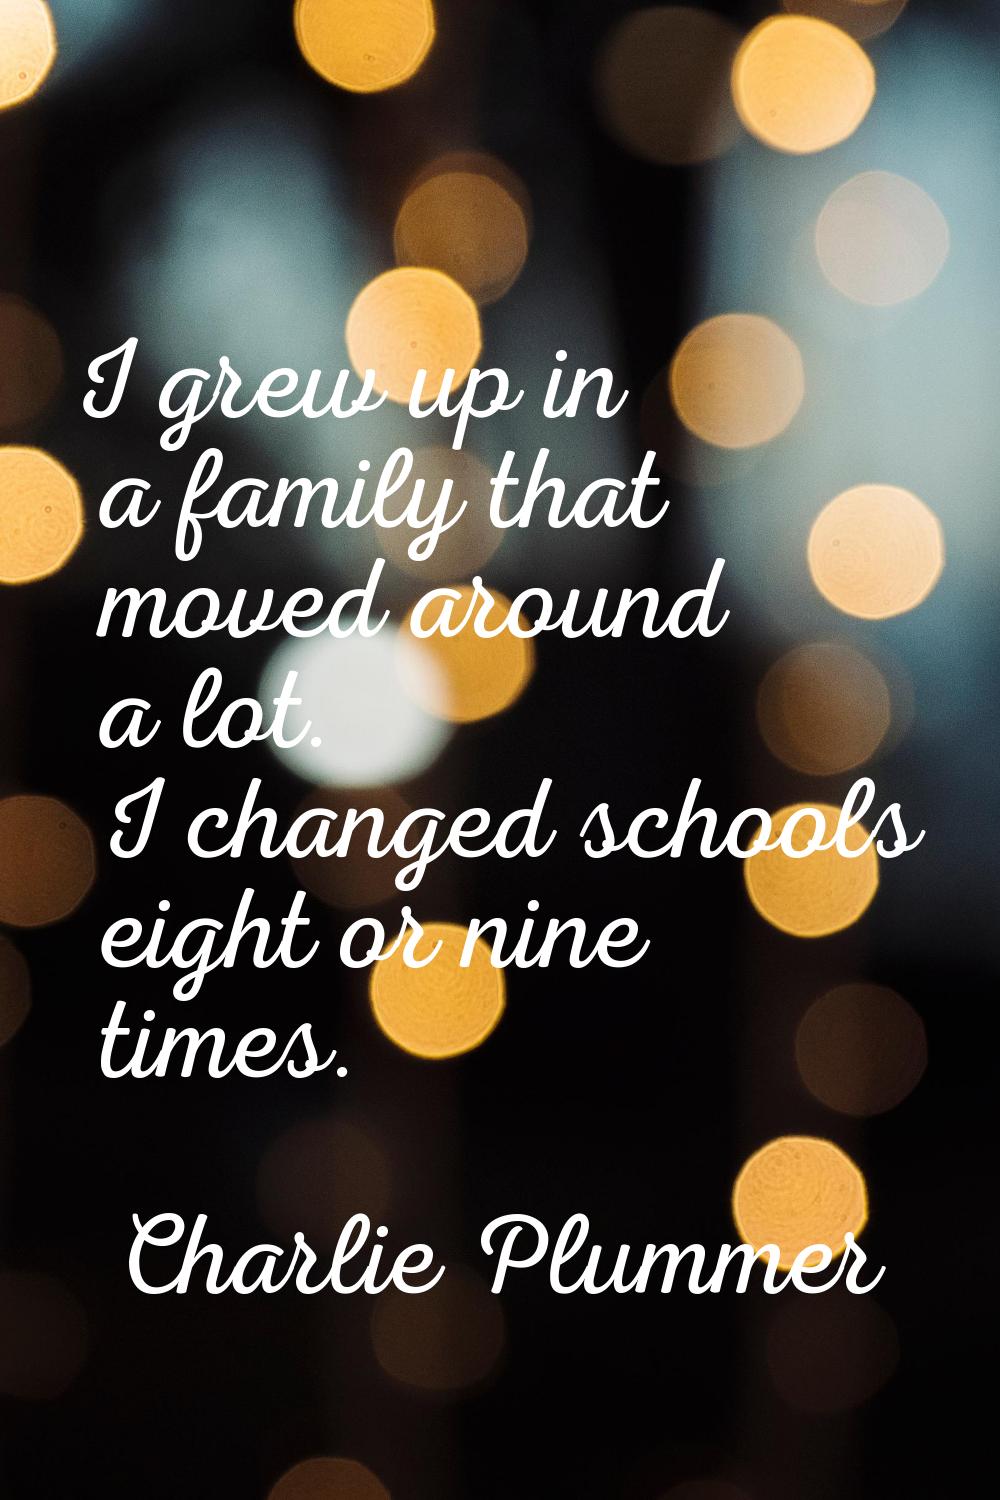 I grew up in a family that moved around a lot. I changed schools eight or nine times.